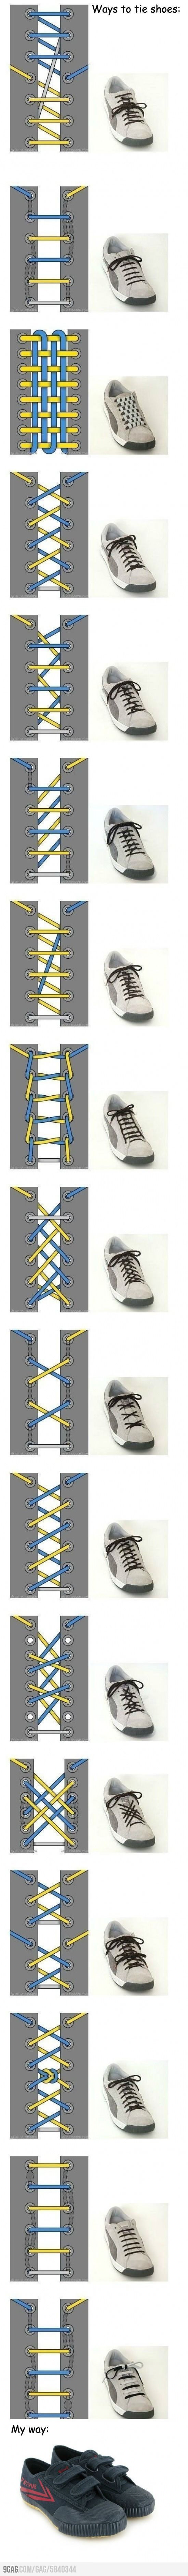 Ways to tie shoes